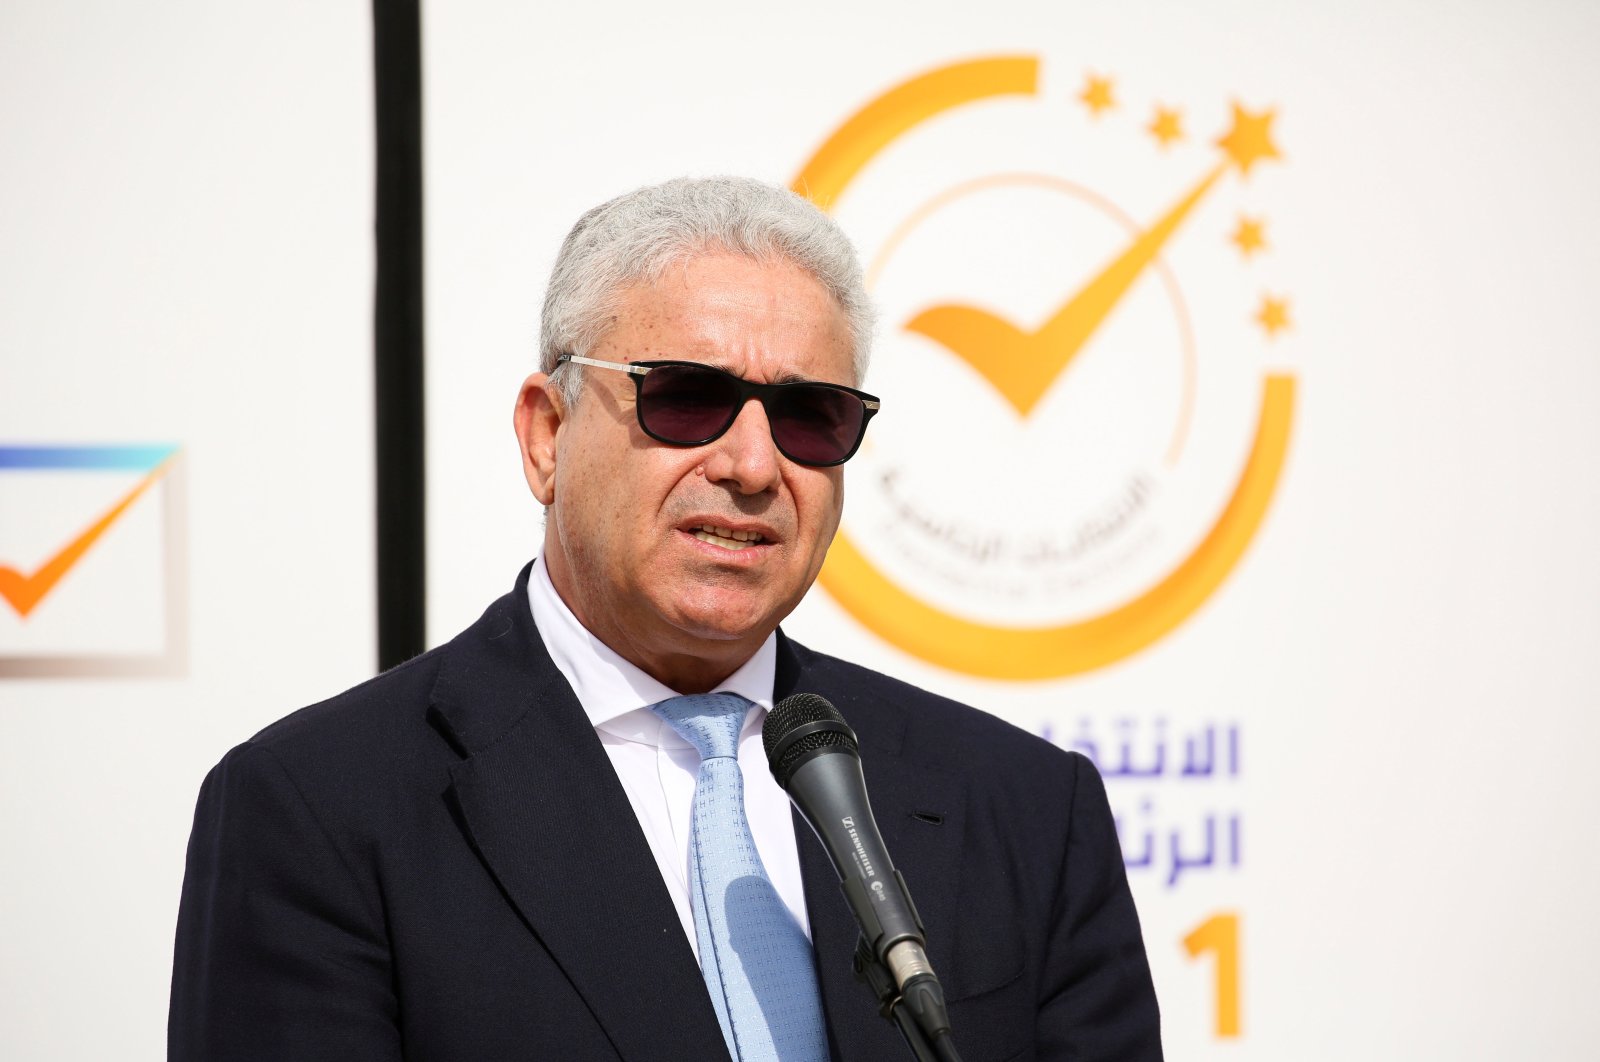 Fathi Bashagha, former Interior Minister, delivers a speech after submitting his candidacy papers for the upcoming presidential election at the Headquarters of the Electoral Commission in Tripoli, Libya, Nov. 18, 2021. (REUTERS)